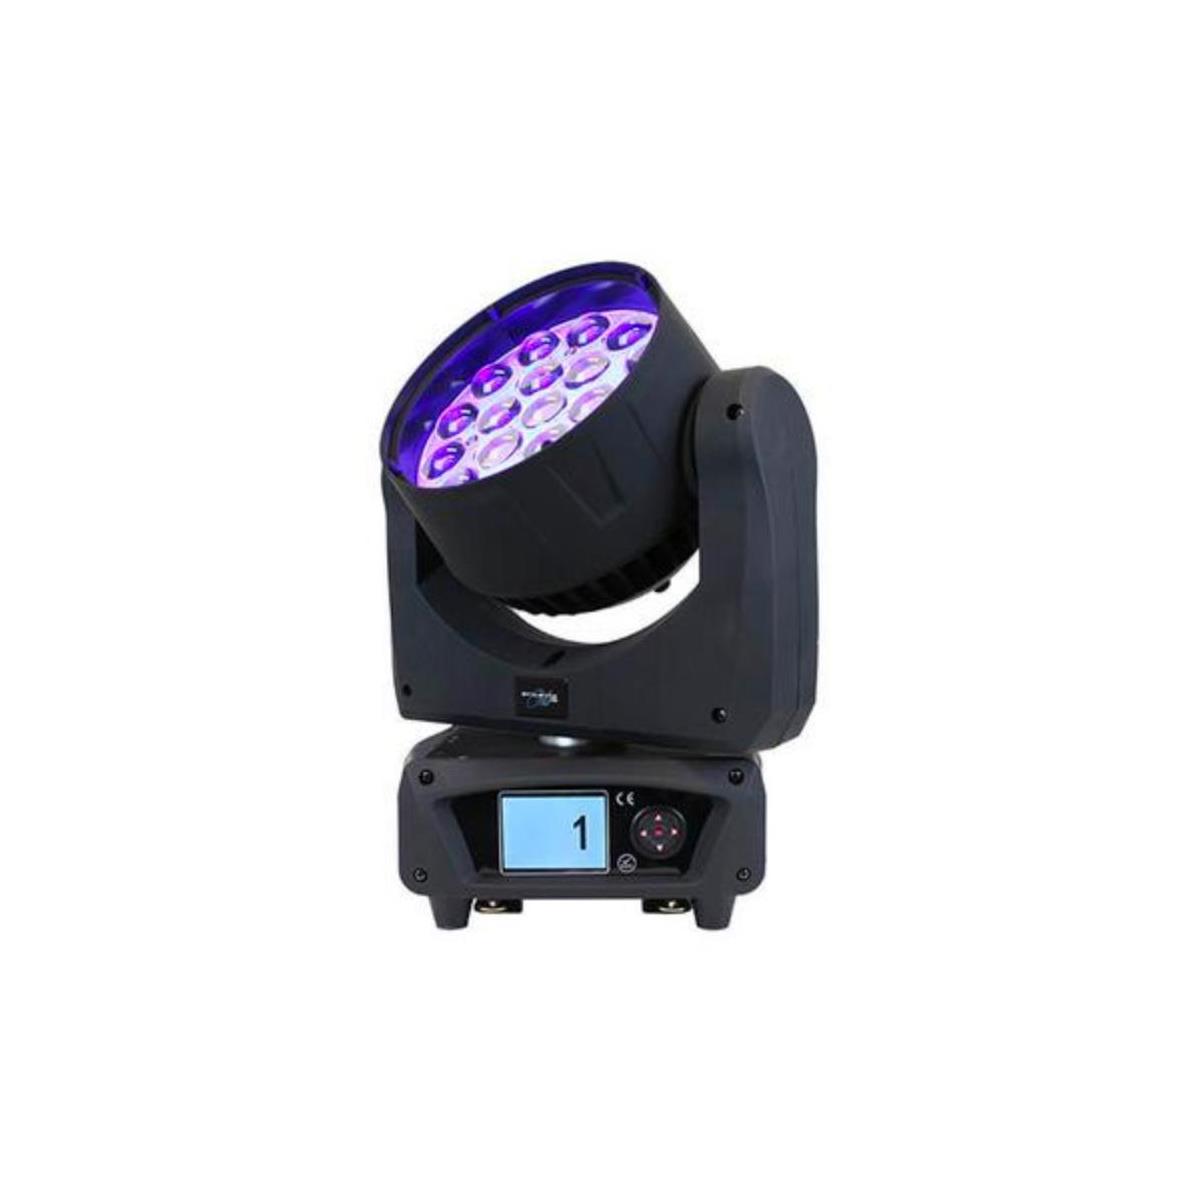 Image of Blizzard Lighting Stiletto Glo19 Moving Head Fixture with 19x 15W OSRAM RGBW LED